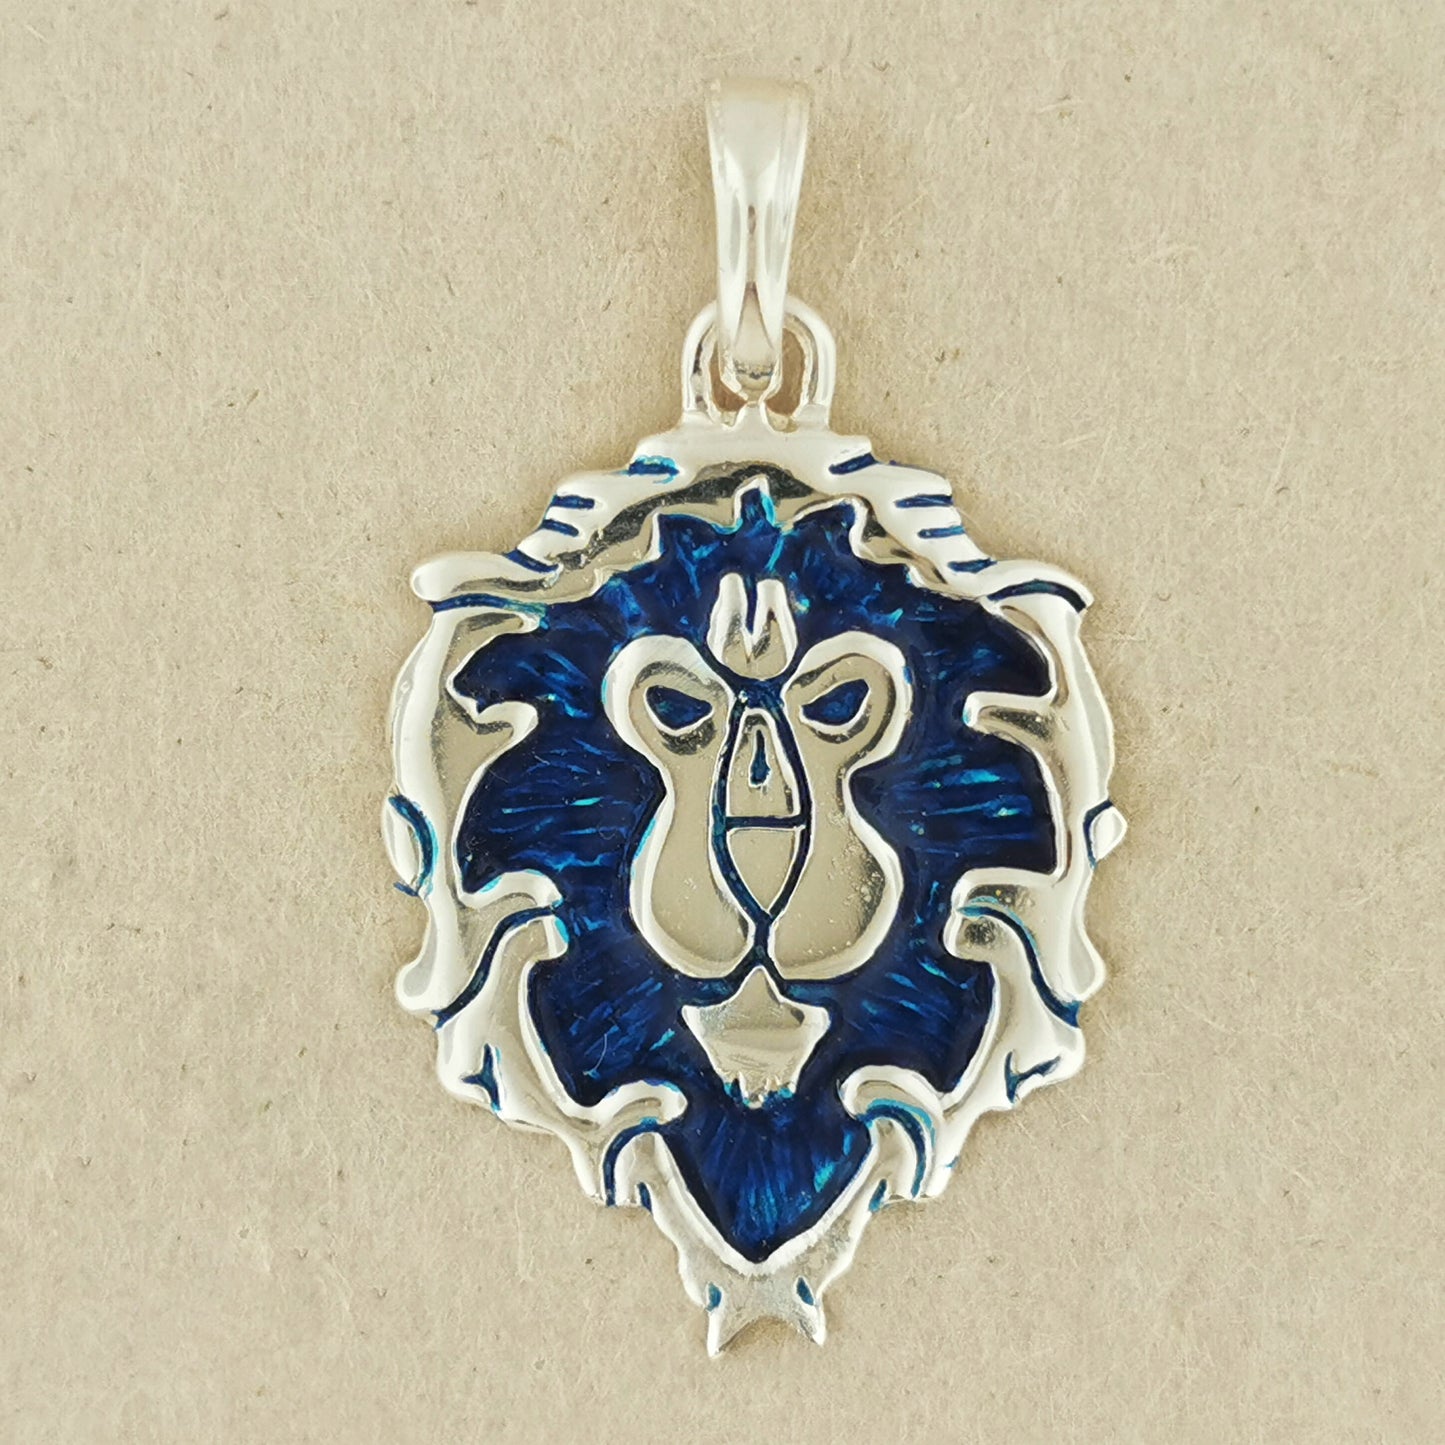 WoW Aliance Lion Pendant in Sterling Silver or Antique Bronze, Silver WOW Pendant, Bronze WOW Pendant, Video Game Pendants, Bronze Lion Pendant, Silver Lion Pendant, Blue Lion Pendant, Red Lion Pendant, Silver WOW Jewelry, Bronze WOW Jewelry, Silver WOW Jewellery, Bronze WOW Jewellery, World Of Warcraft Pendant, World of Warcraft Jewelry, World of Warcraft Jewellery